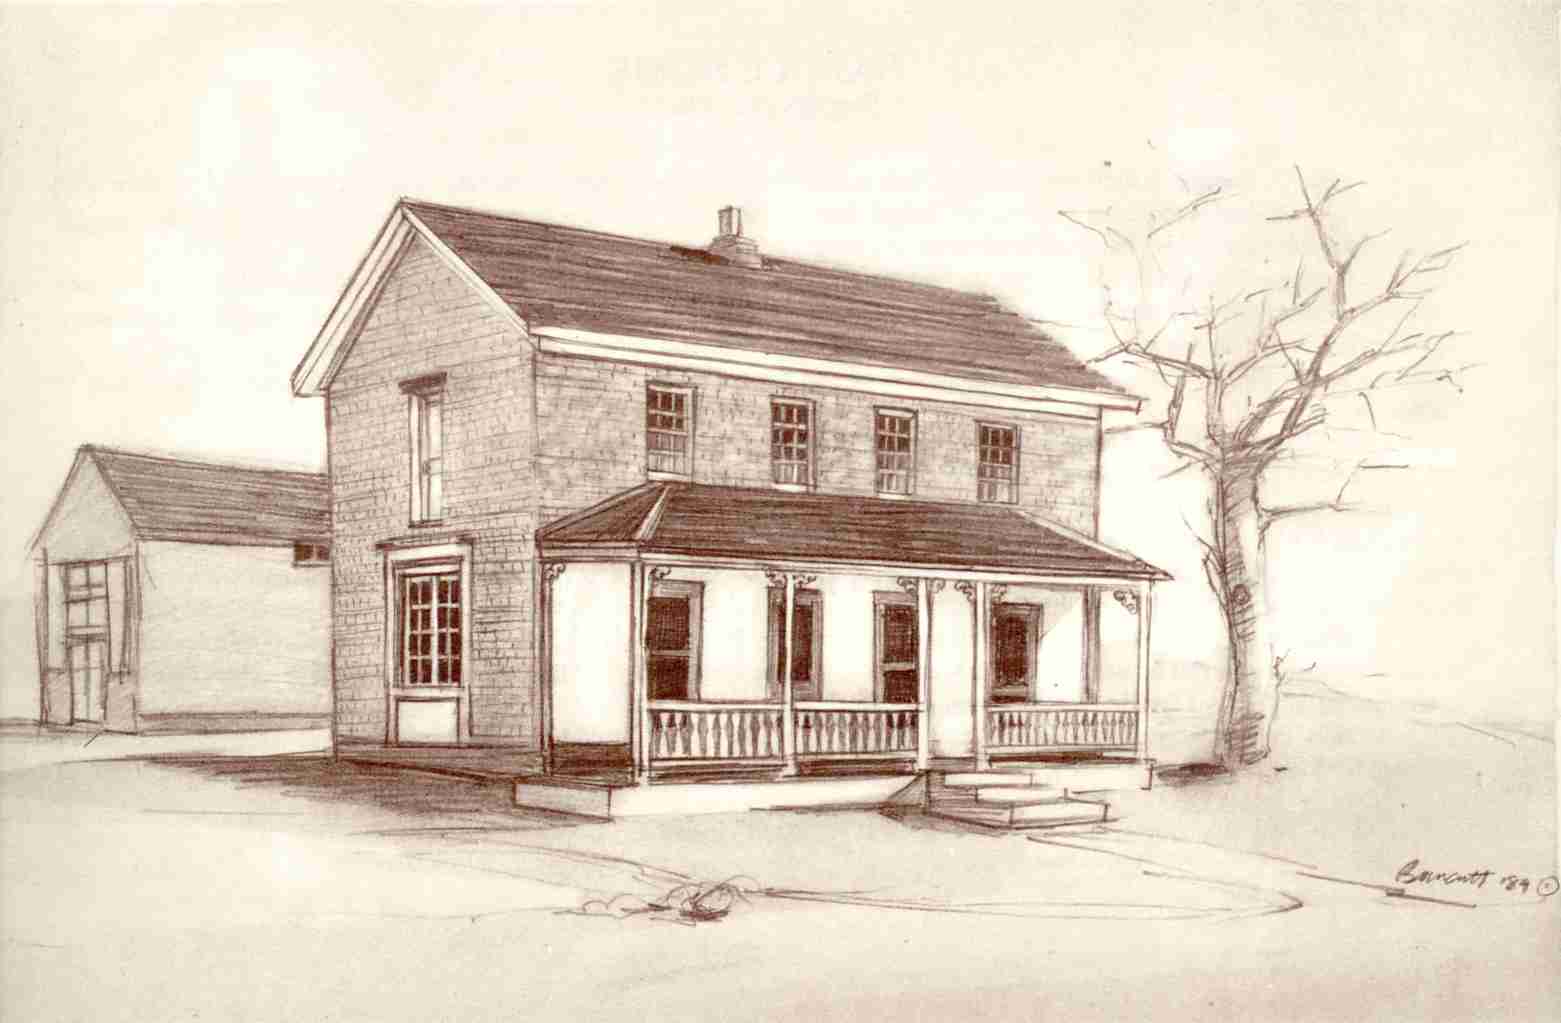 Sketch of the Isom-Semmens Home